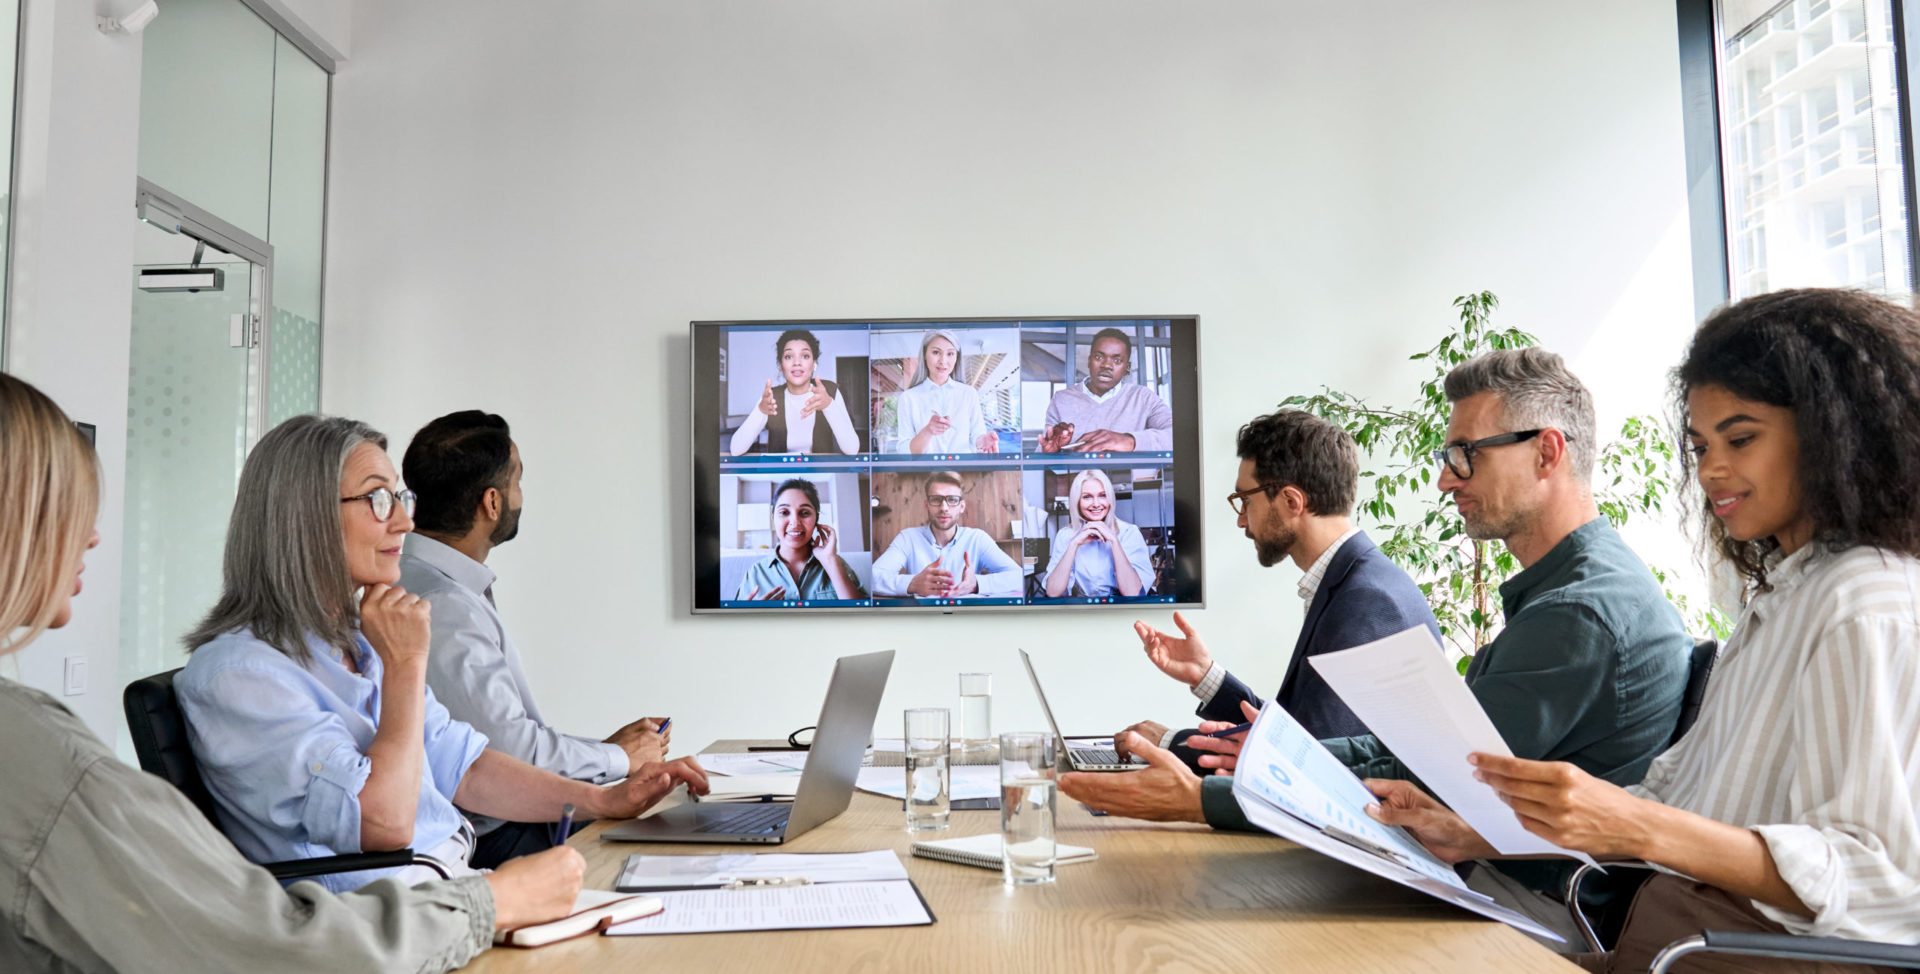 5 Ways to Enhance Video Conference Booking With a Meeting Room System